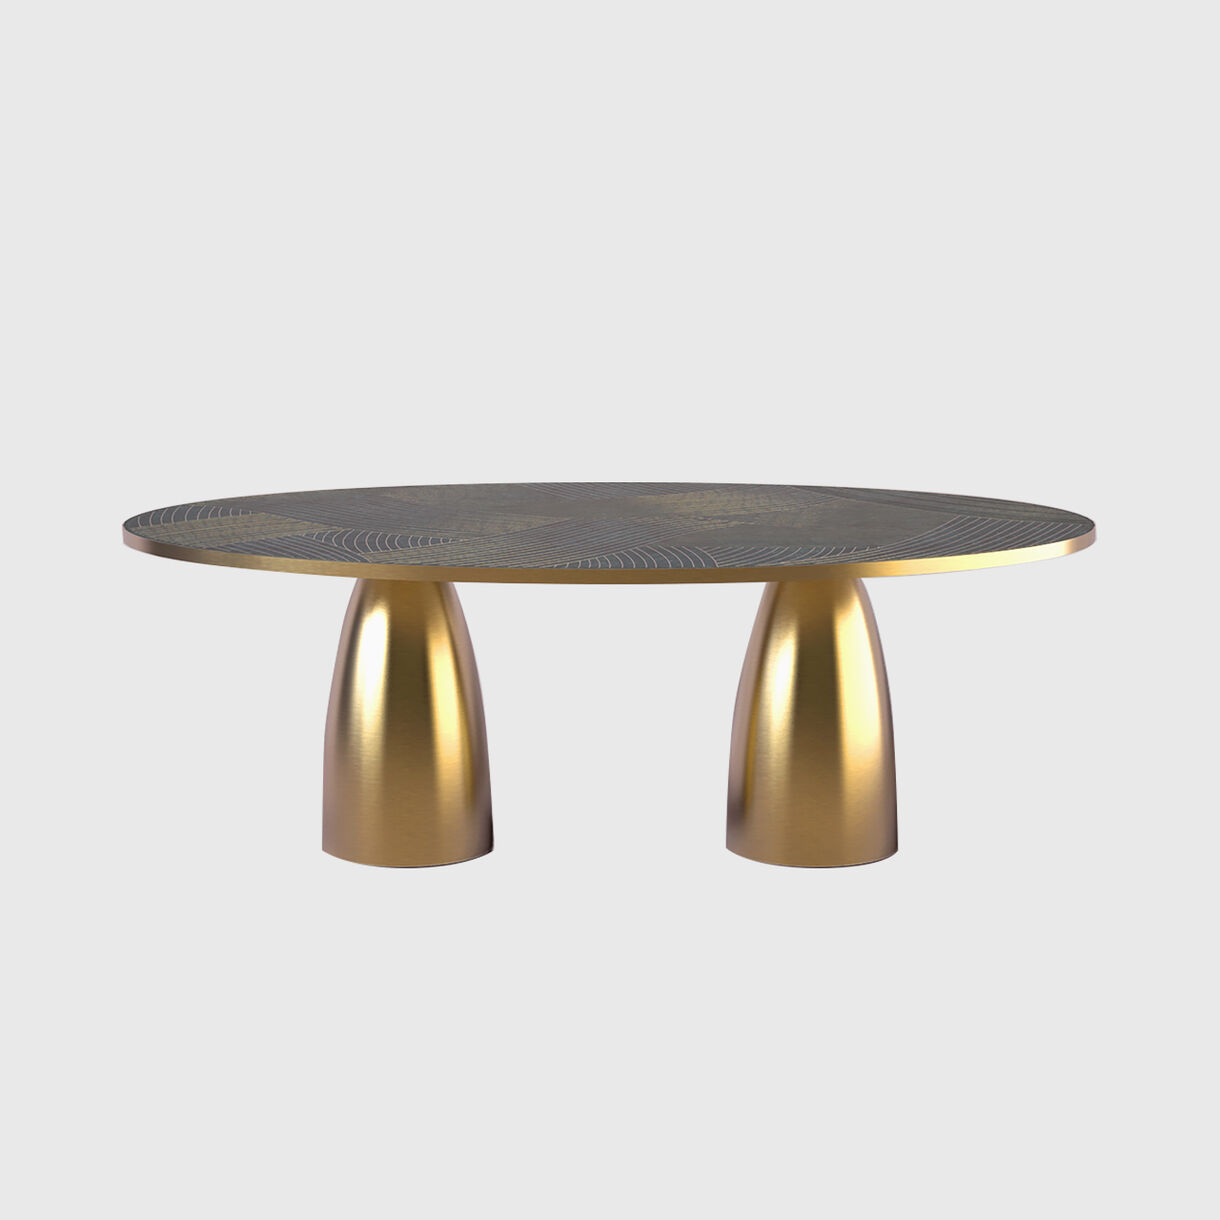 Lustre Oval Dining Table, Nero Marble with Dhow Inlay